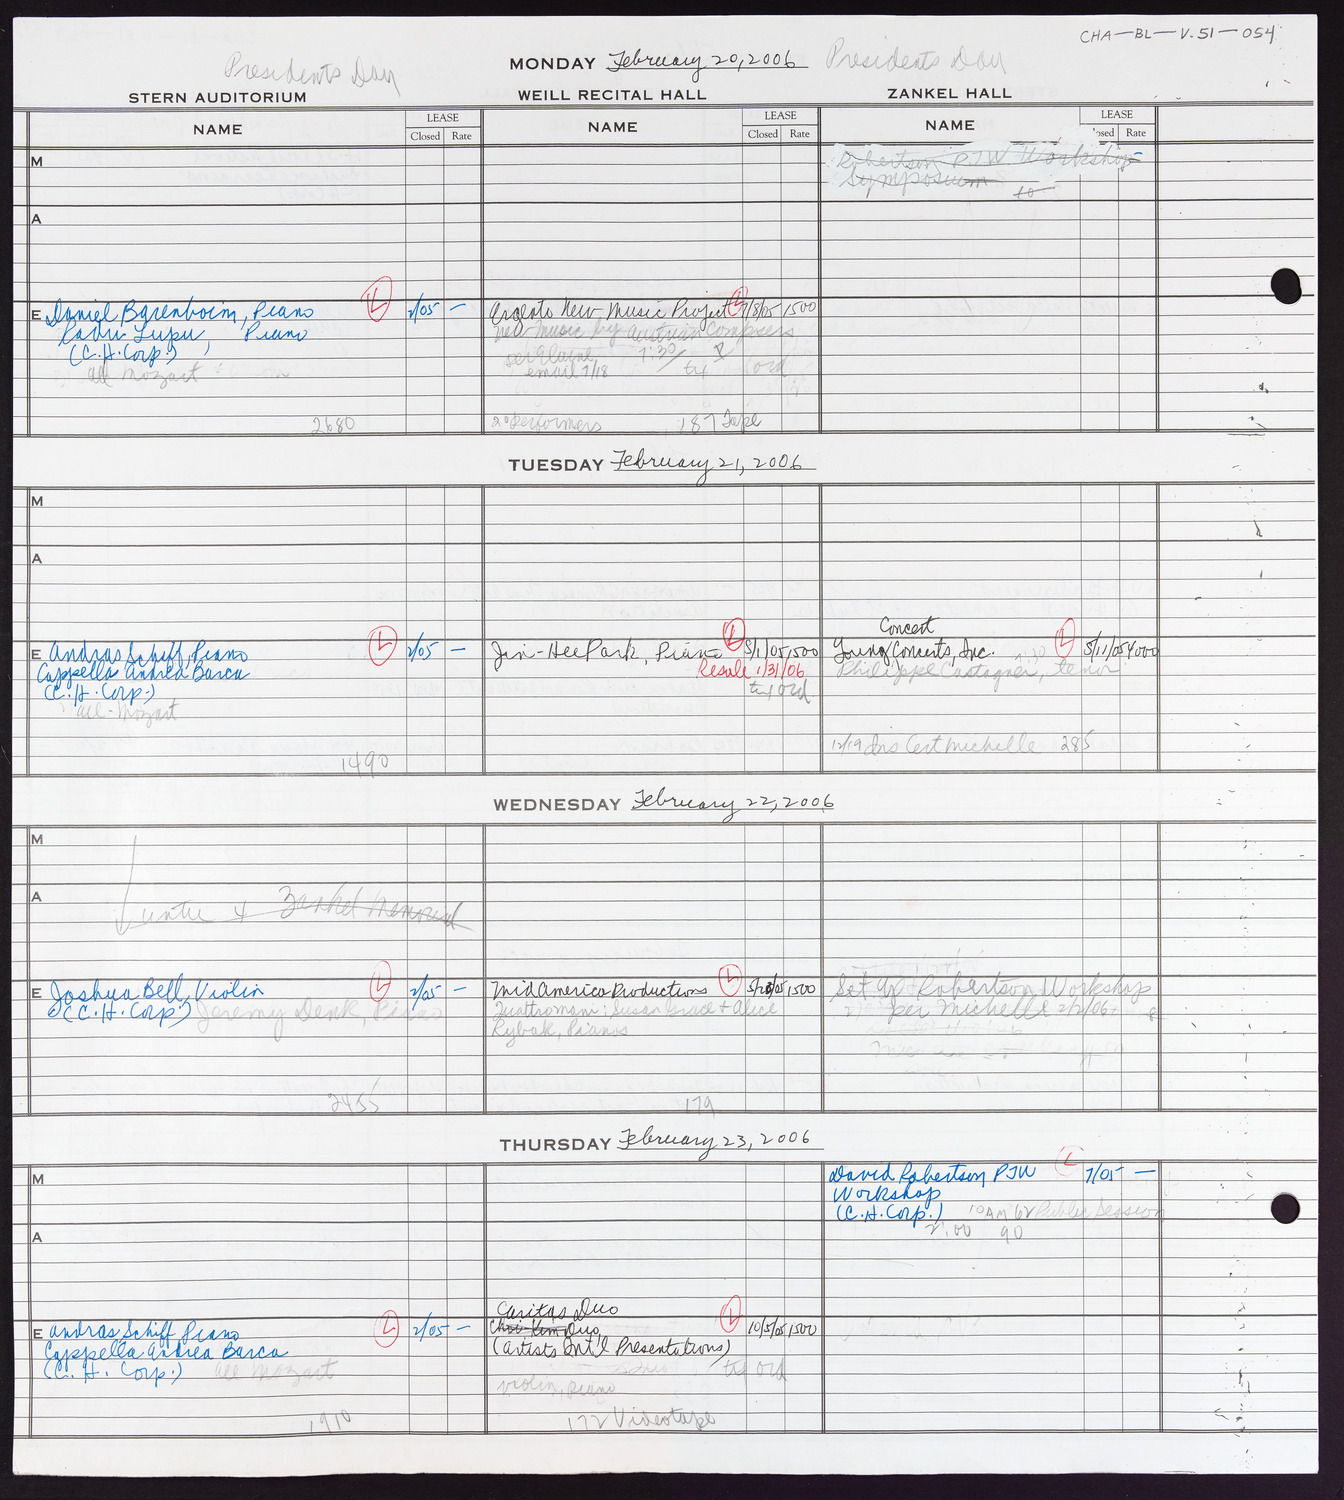 Carnegie Hall Booking Ledger, volume 51, page 54